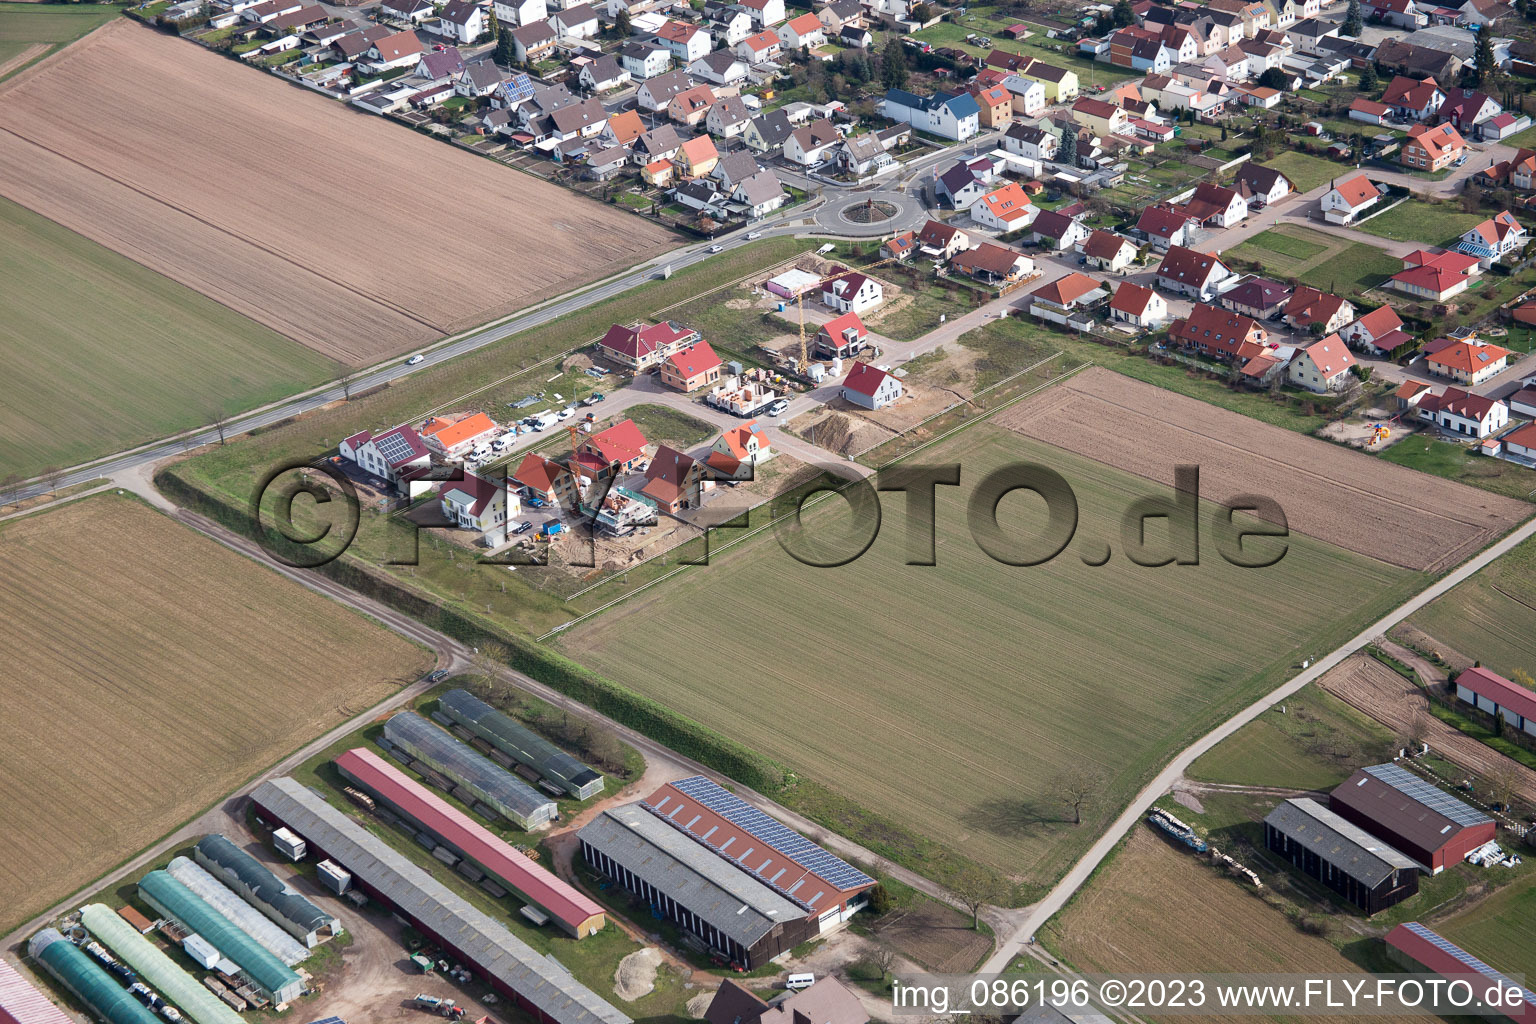 Hördt in the state Rhineland-Palatinate, Germany seen from above